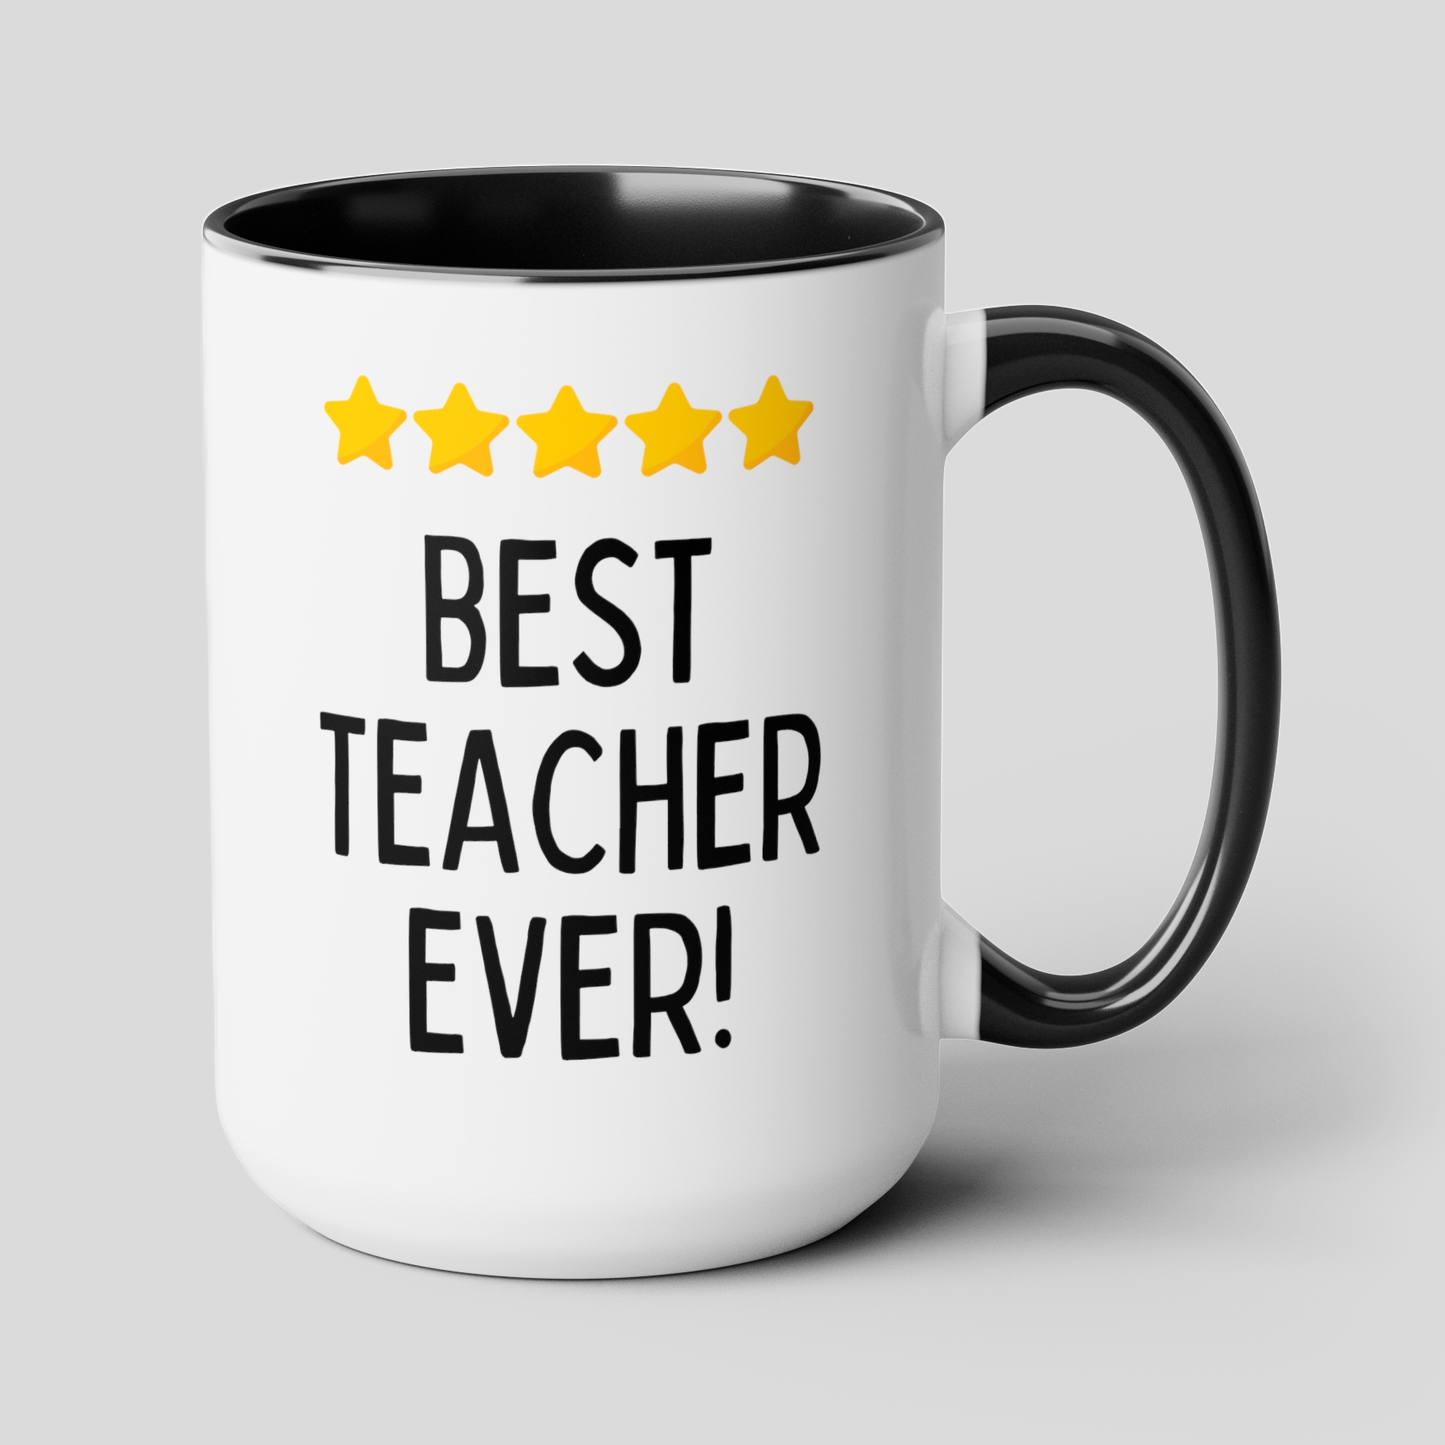 Best Teacher Ever 15oz white with black accent funny large coffee mug gift for educator teaching assistant end of the year present professor tutor five stars waveywares wavey wares wavywares wavy wares cover